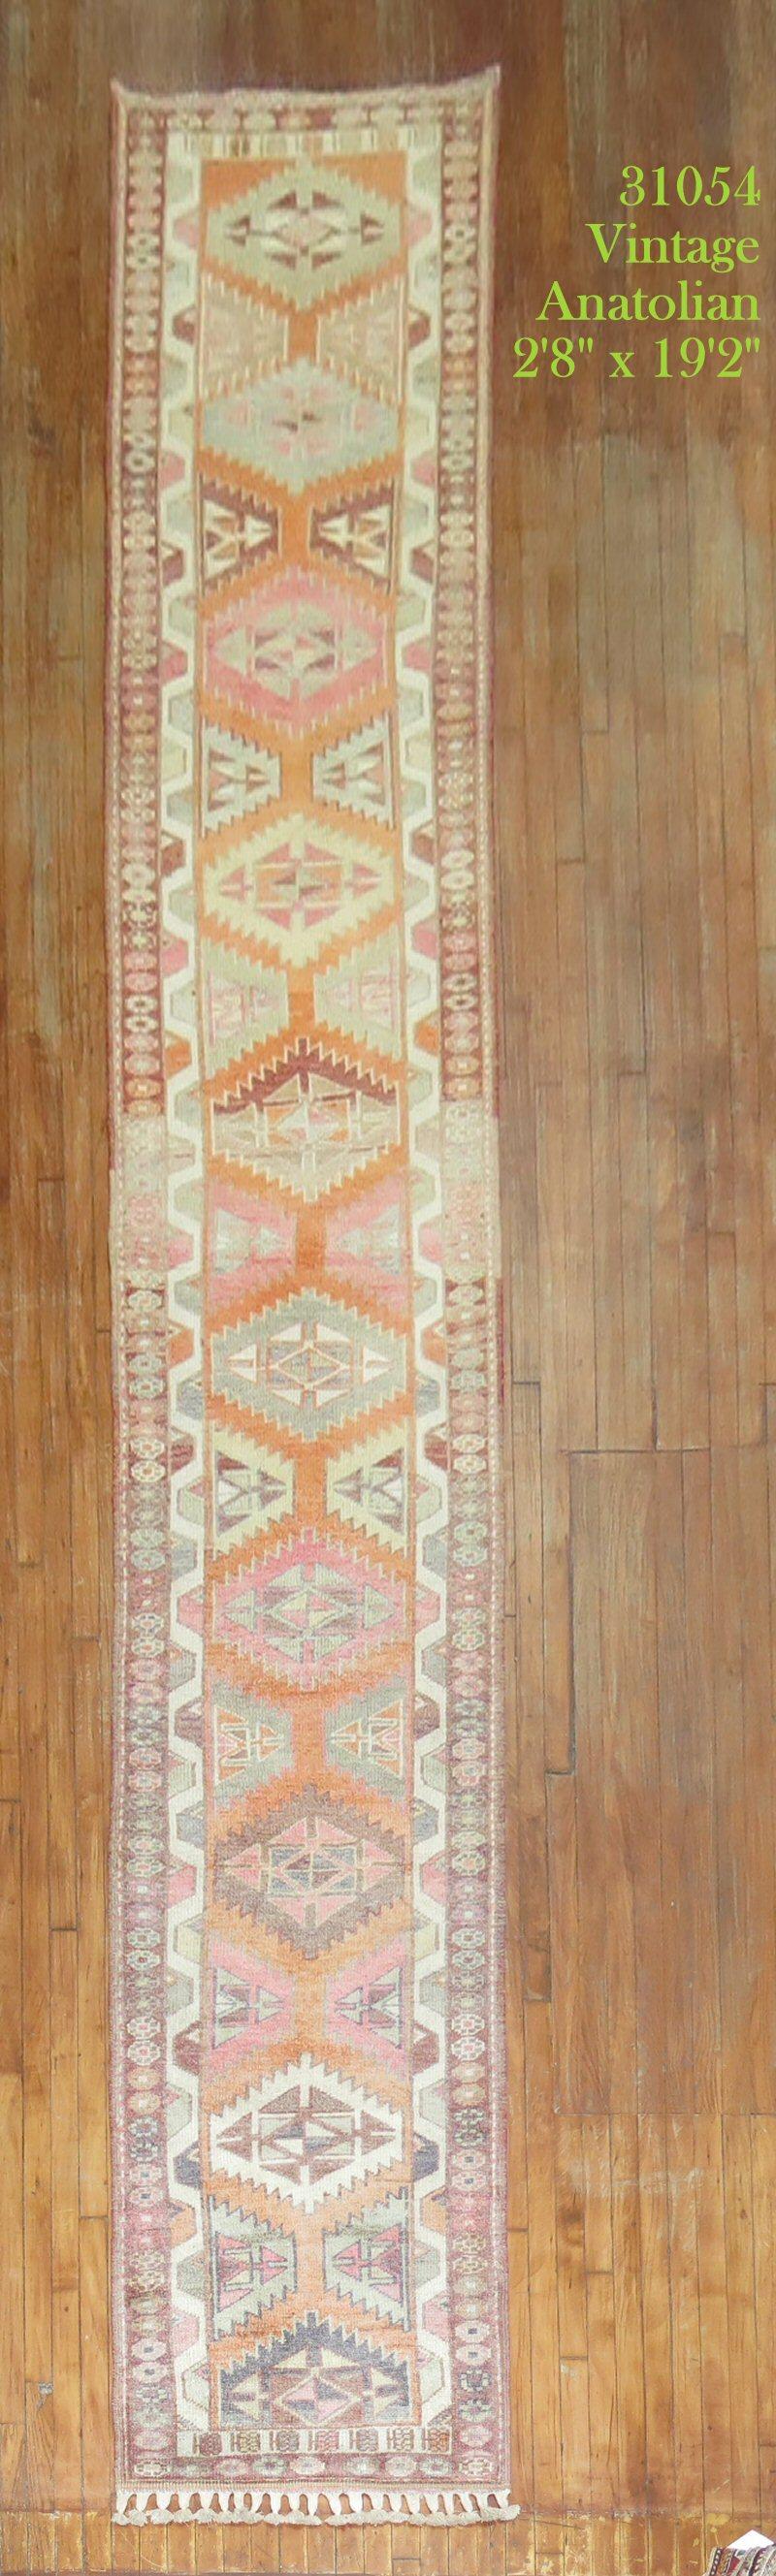 A rare long and narrow 20th century Turkish geometric runner with a dominant orange color. You need an extremely long and narrow hallway for this beauty

Measures: 2'8